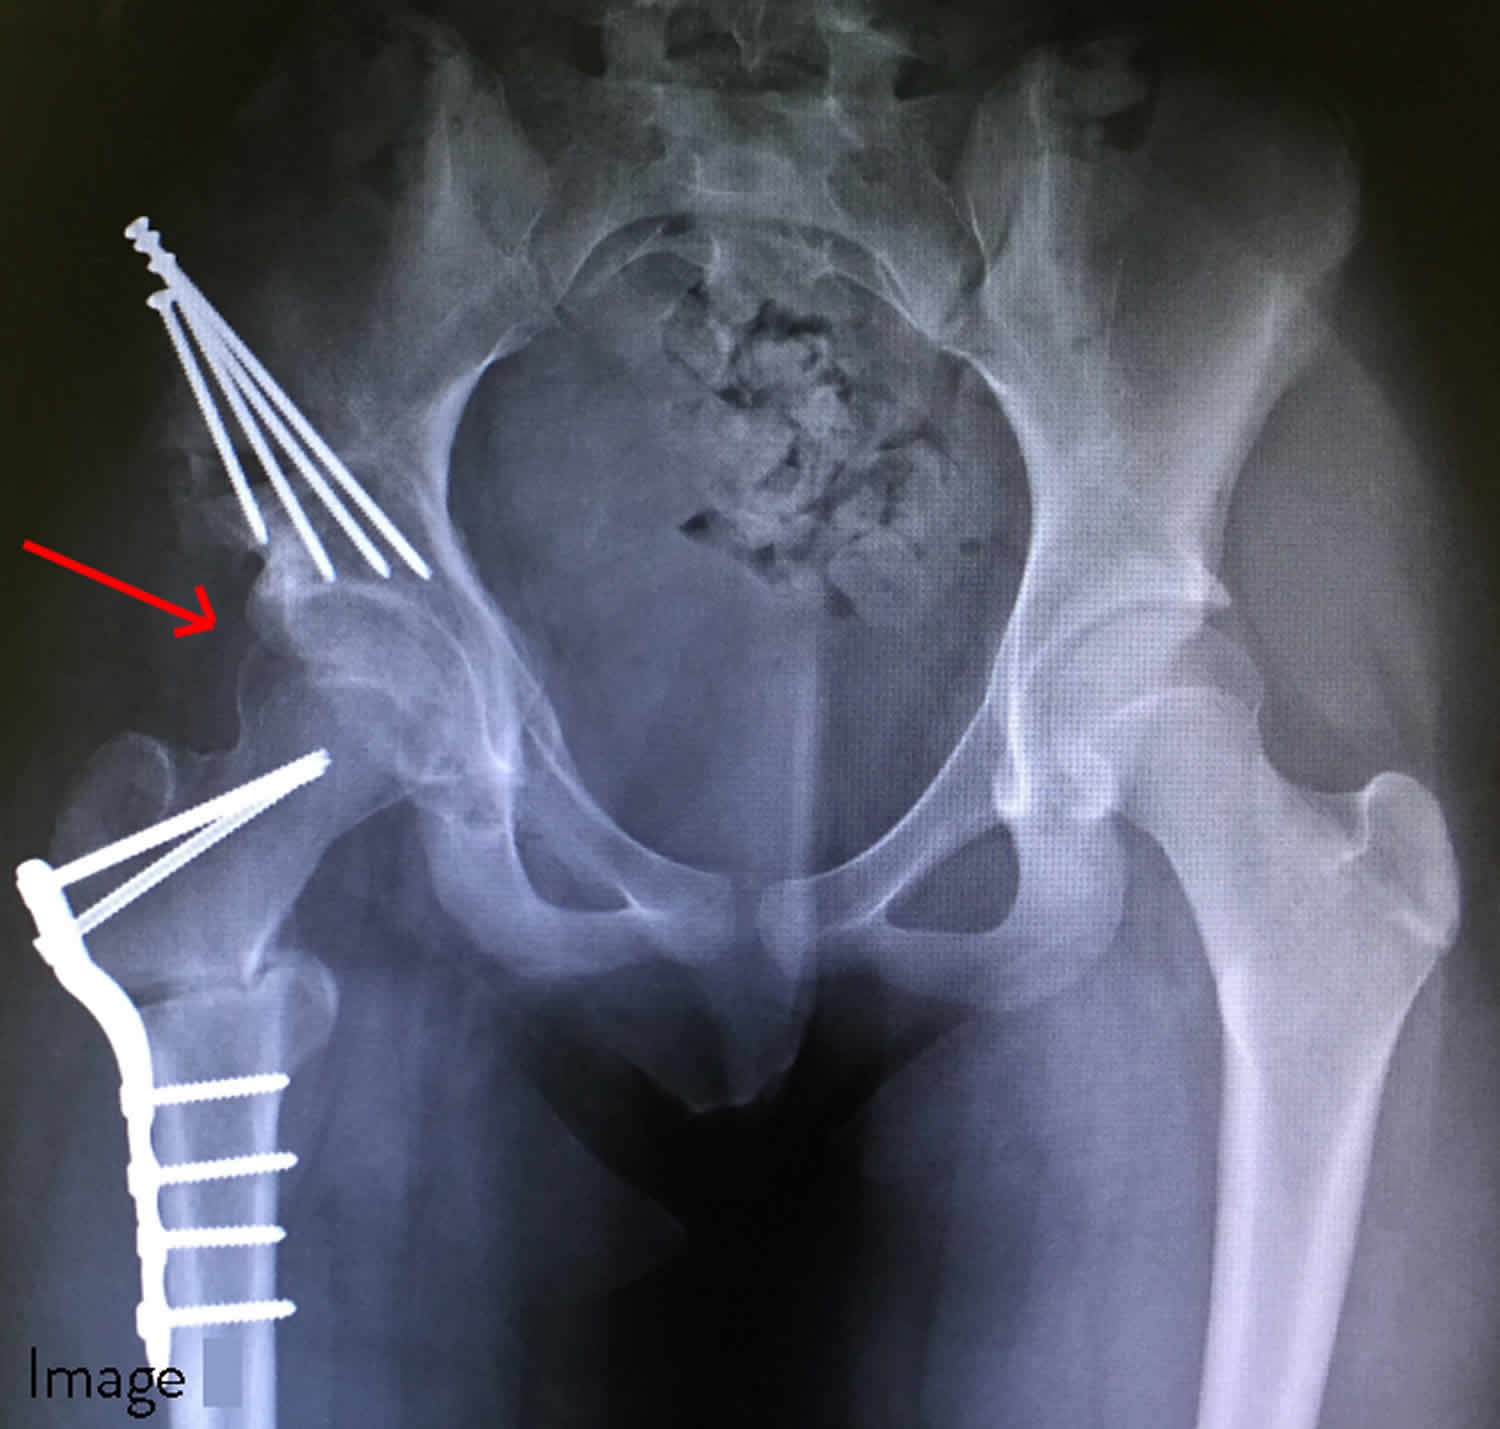 Periacetabular osteotomy combined with a femoral osteotomy for acetabular dysplasia